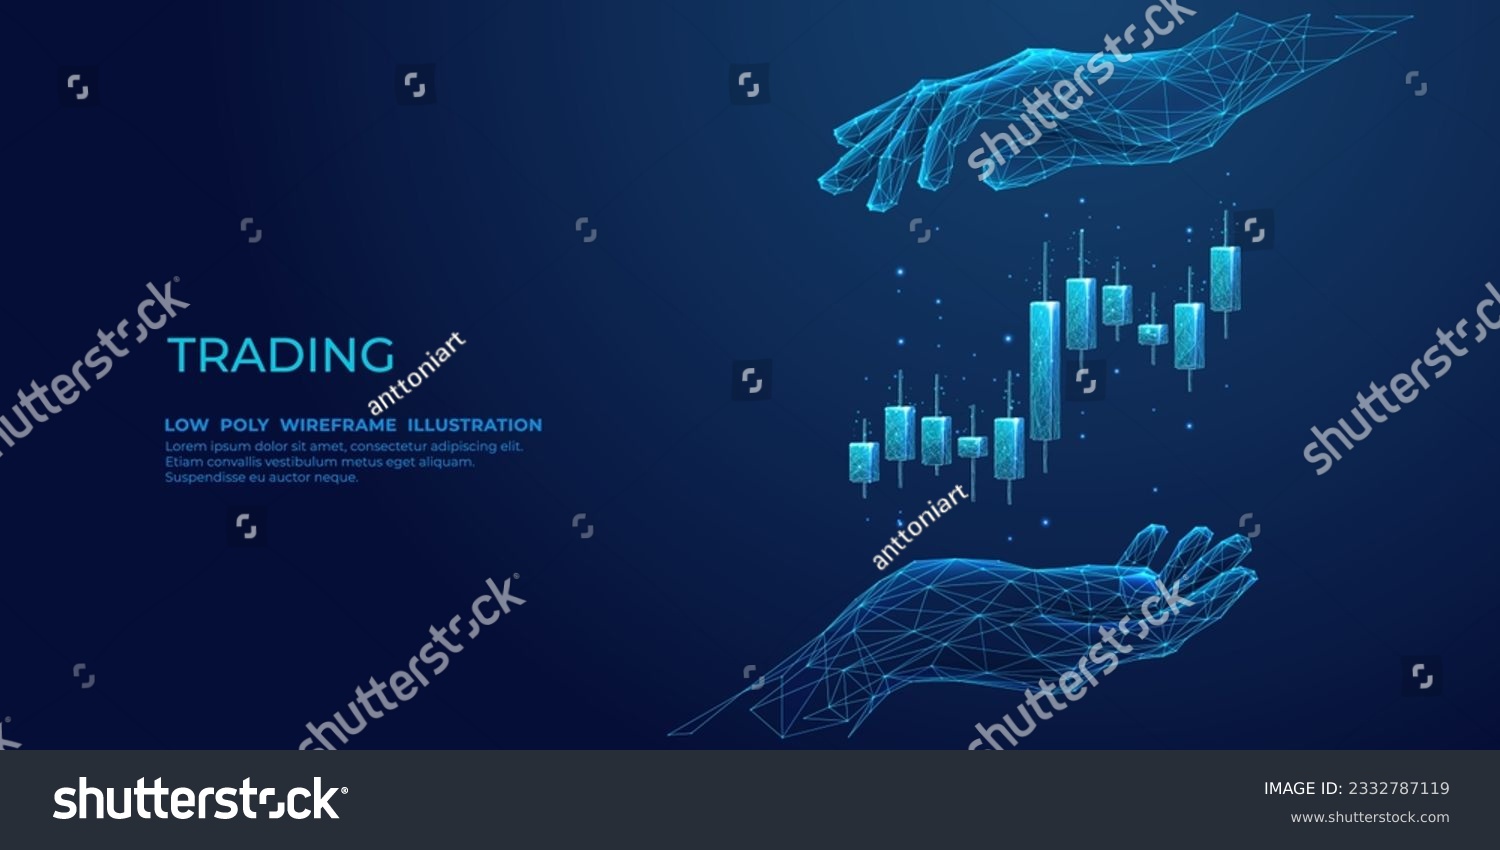 SVG of Abstract Human Hand Holding Candlestick. Stock Market and Investment Concept. Protection of Graph Chart on Technological Blue Background. Low Poly Wireframe Vector Illustration with 3D Effect.
 svg